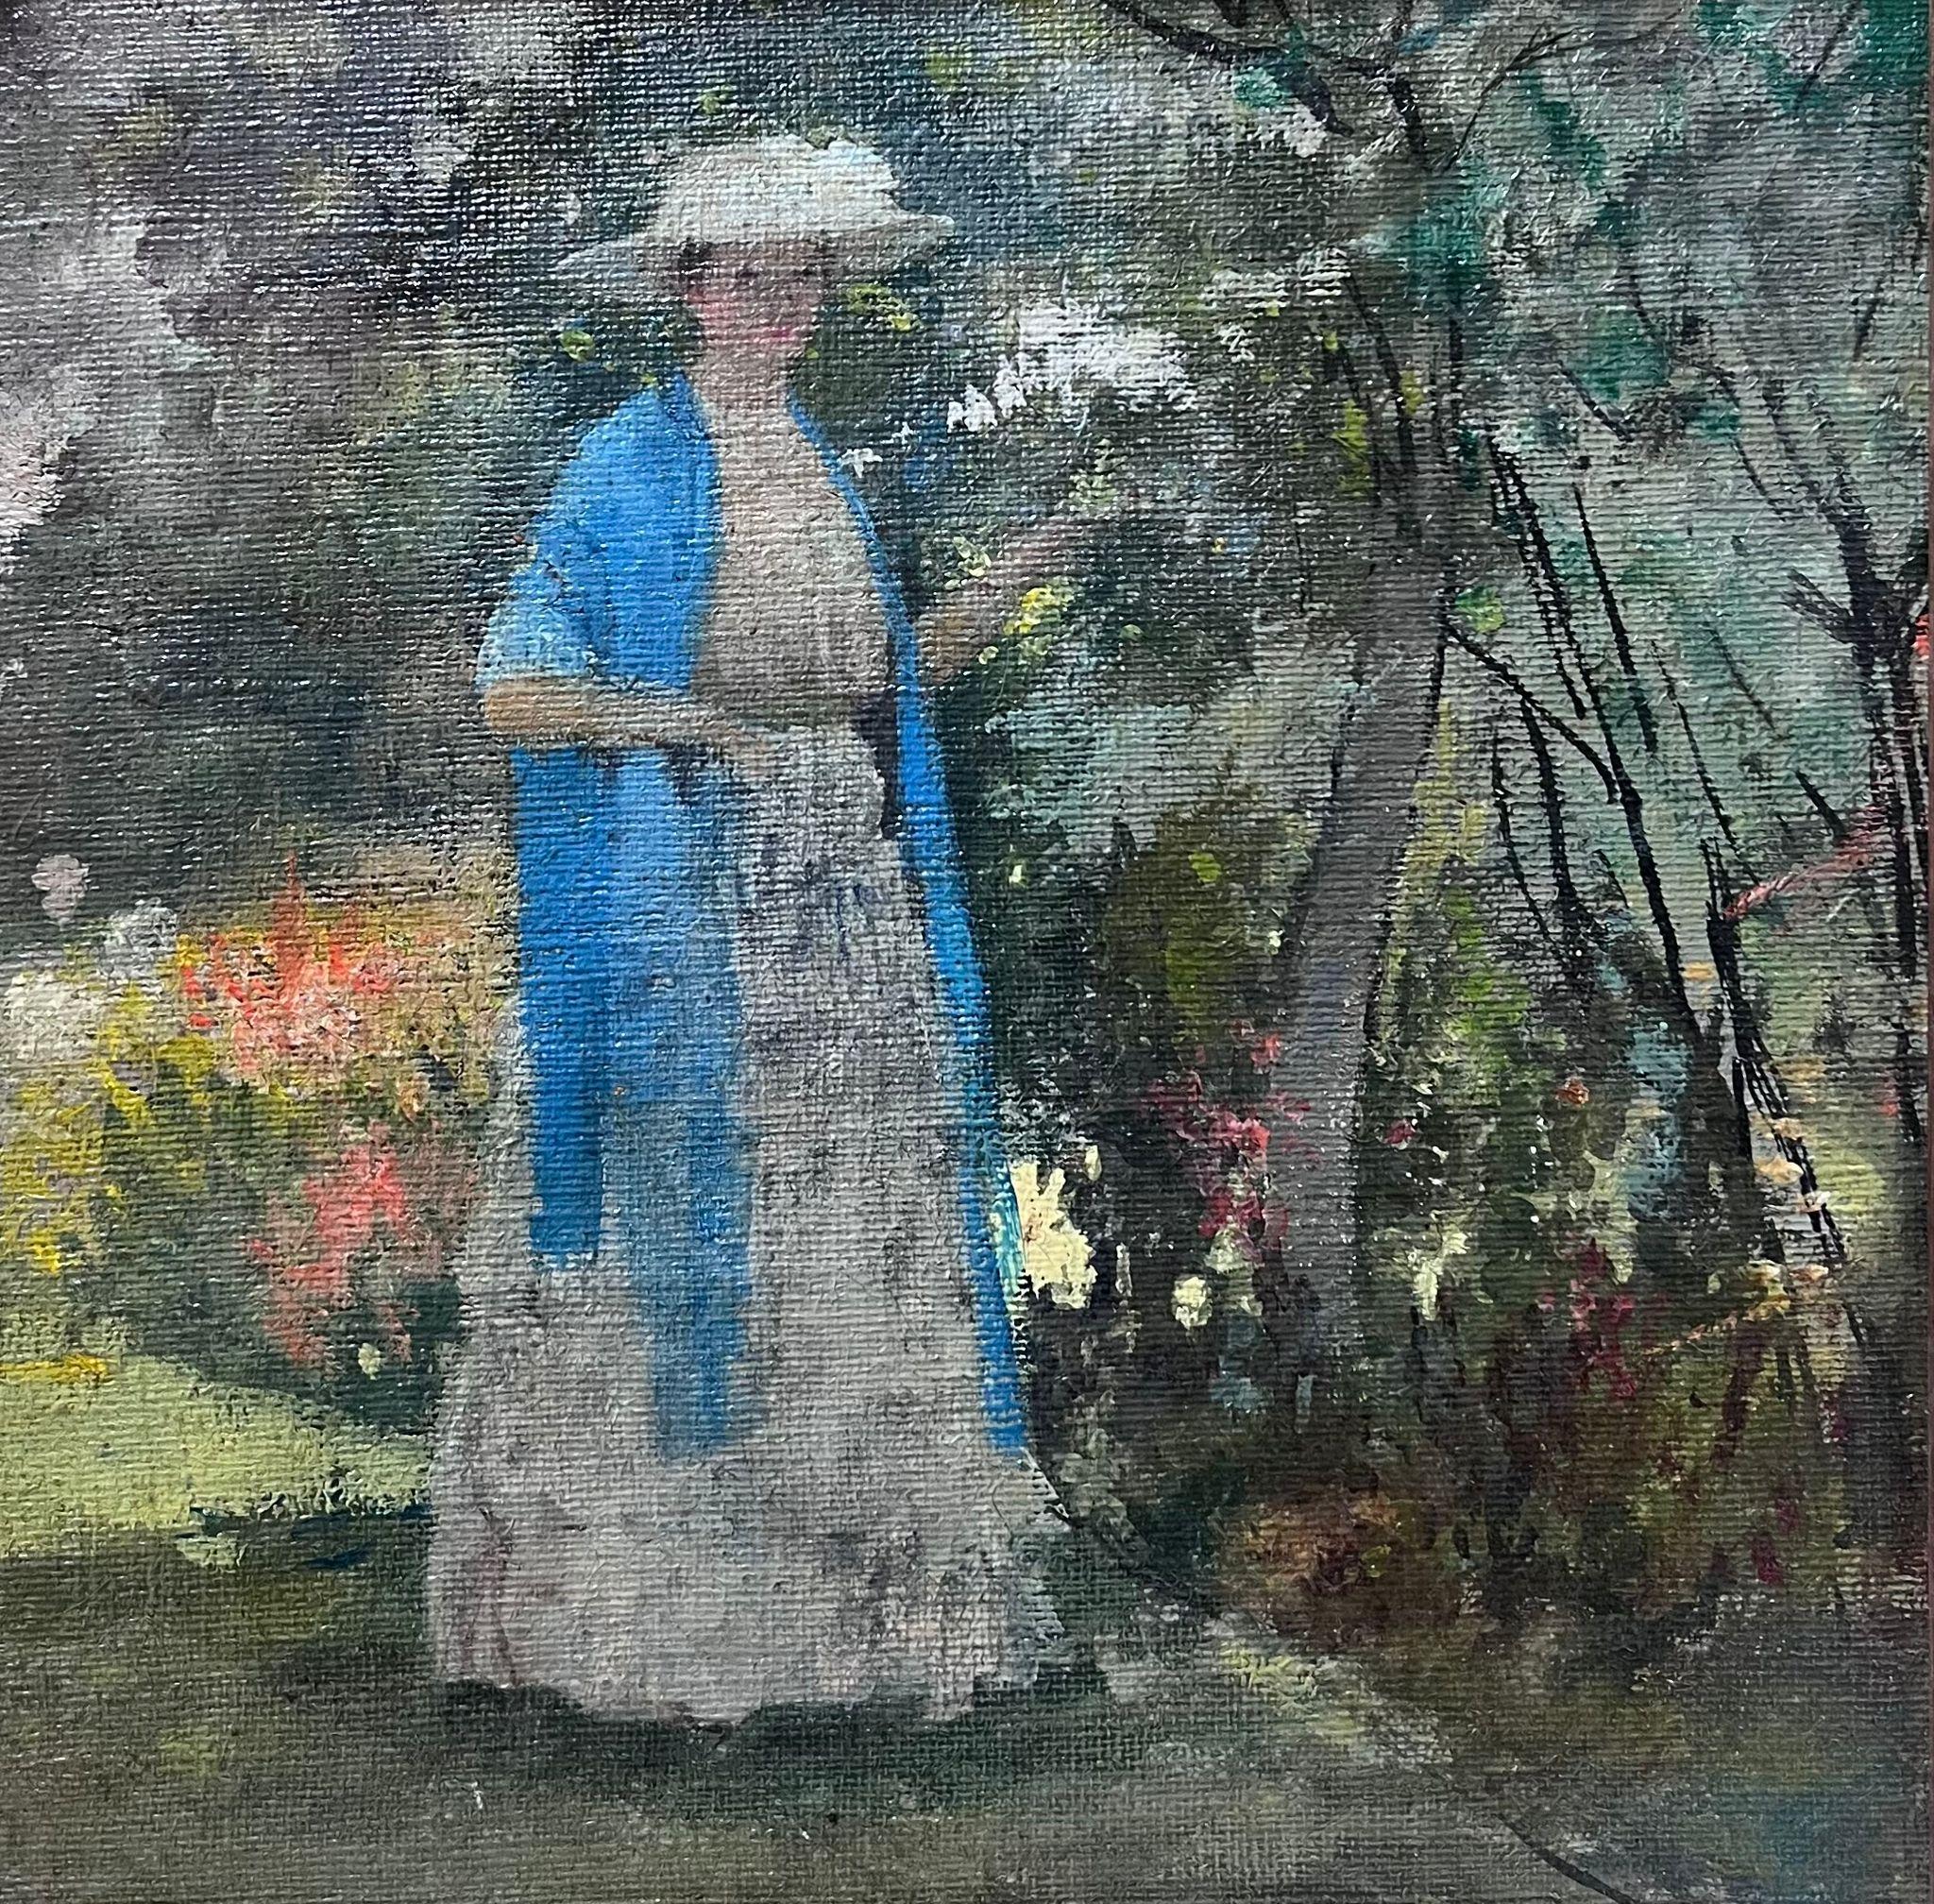 French School  Portrait Painting - Nabis School Early 1900s French Oil Painting Lady in Blue Scarf in Floral Garden